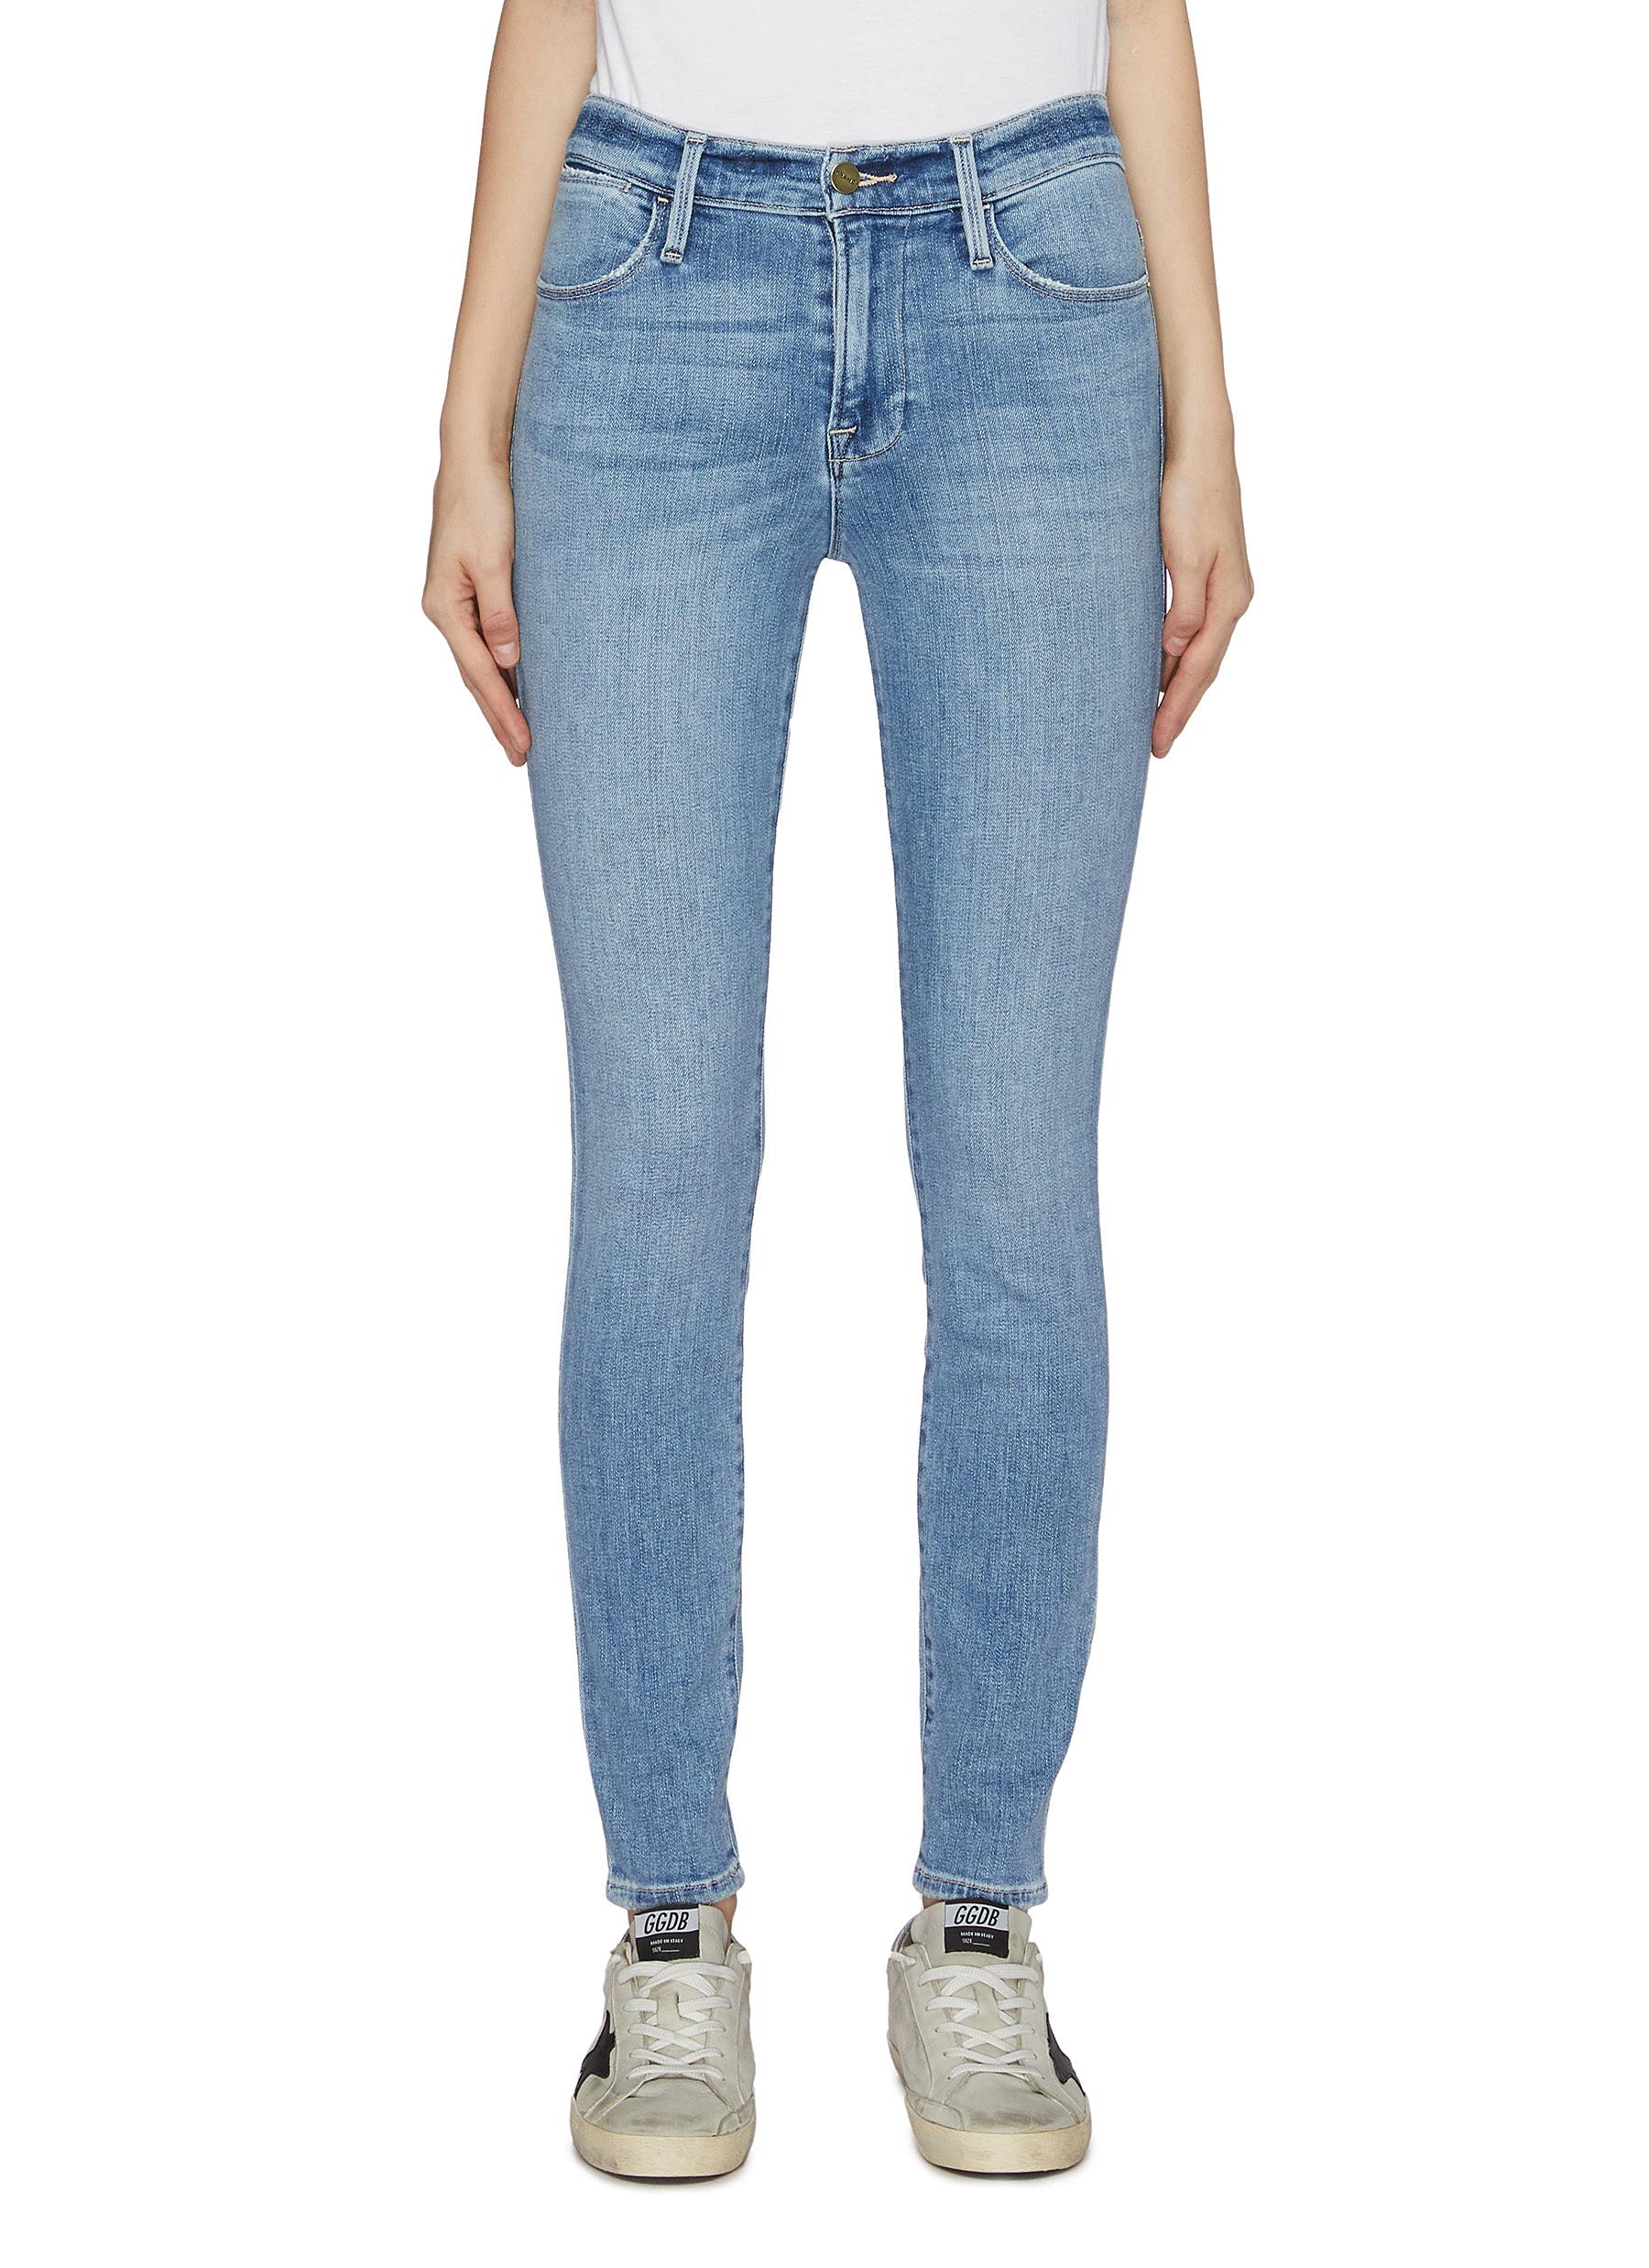 light wash jeans womens